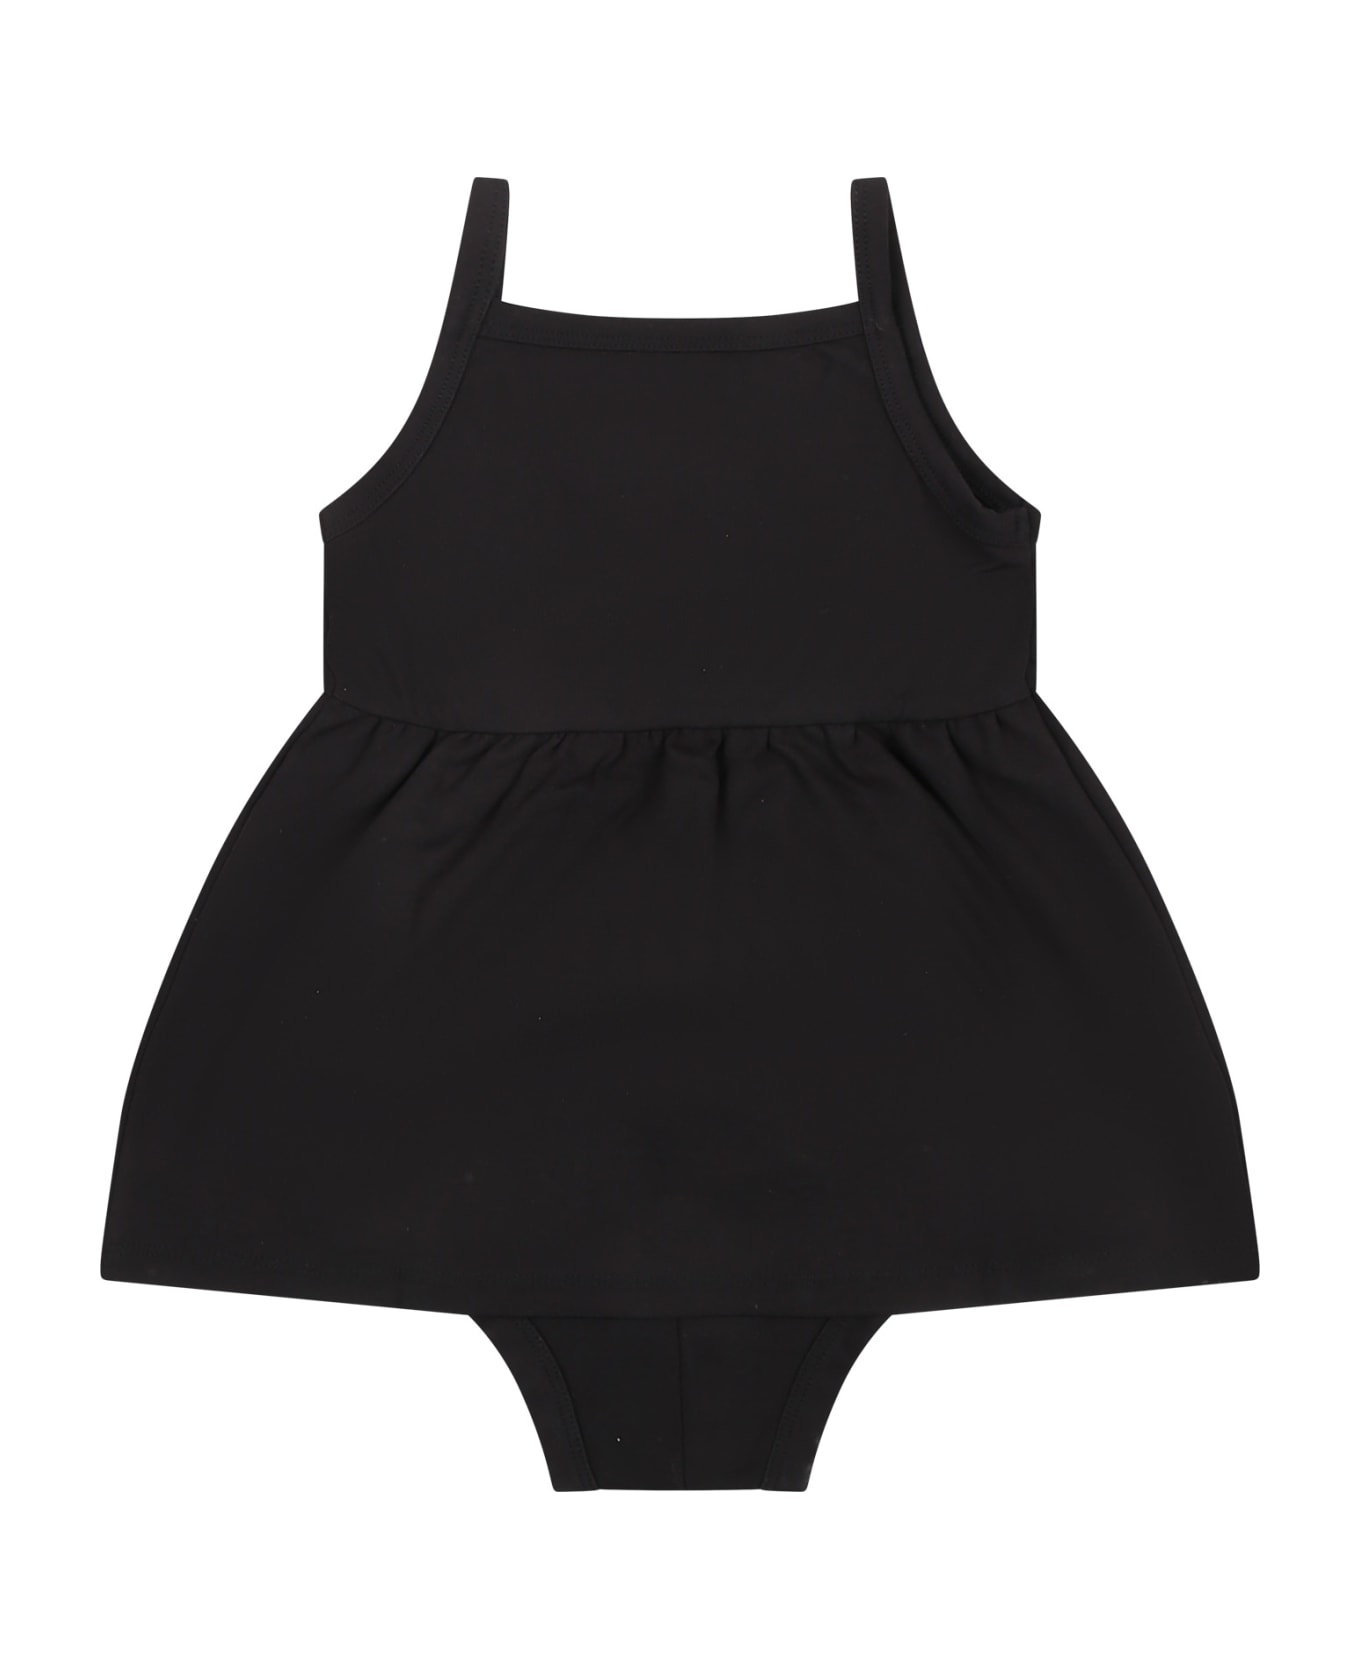 Calvin Klein Casual Black Dress For Baby Girl With Logo - Black